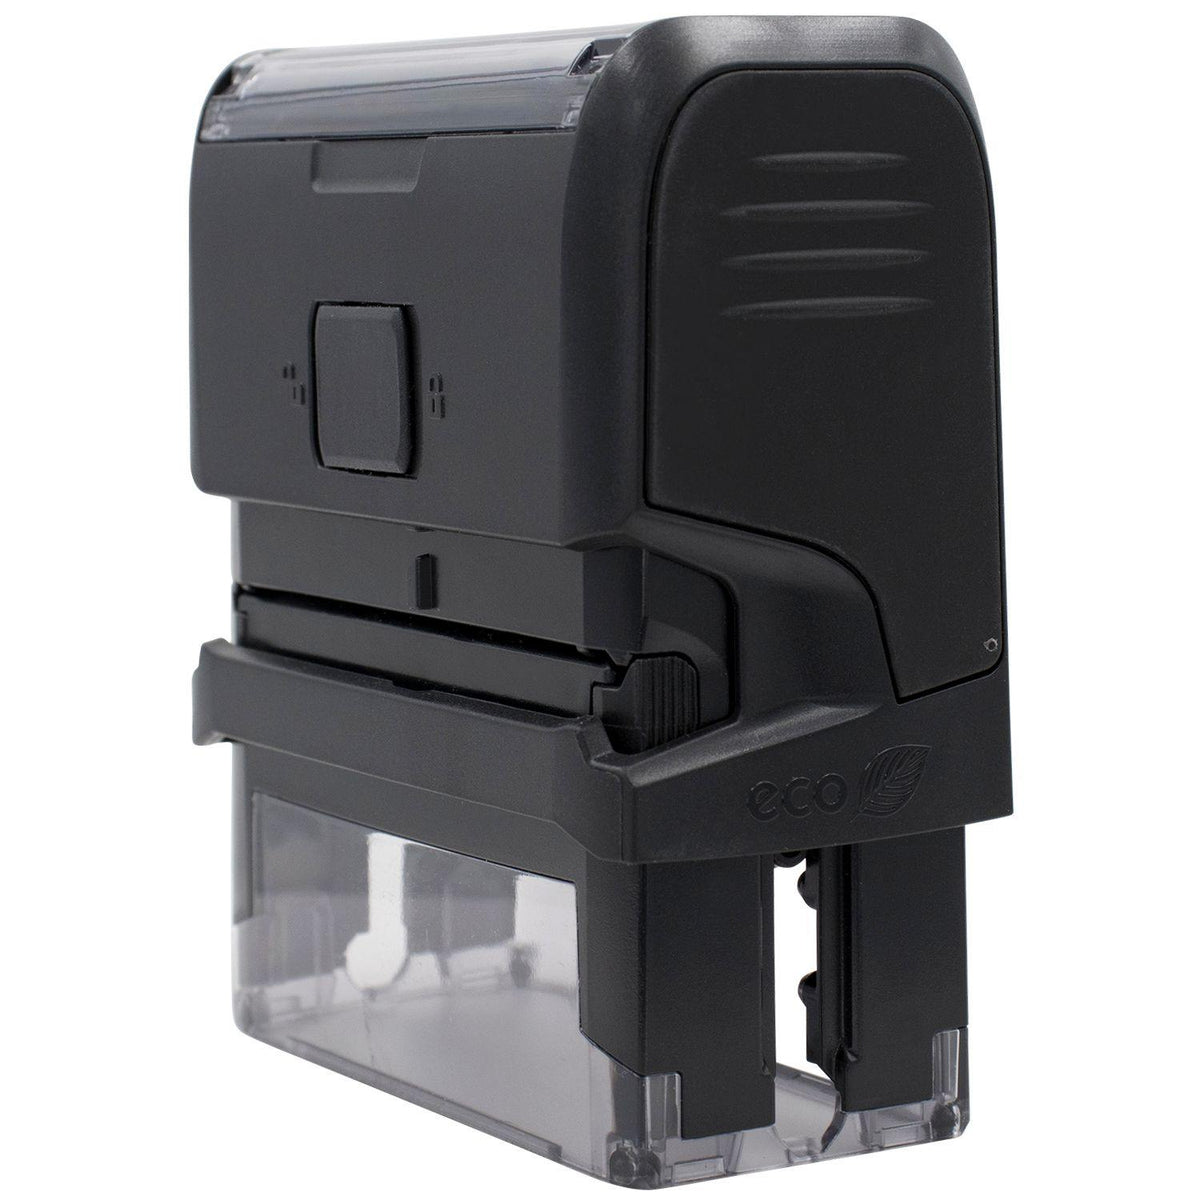 Large Self-Inking Pagado with Box Stamp - Engineer Seal Stamps - Brand_Trodat, Impression Size_Large, Stamp Type_Self-Inking Stamp, Type of Use_Business, Type of Use_General, Type of Use_Office